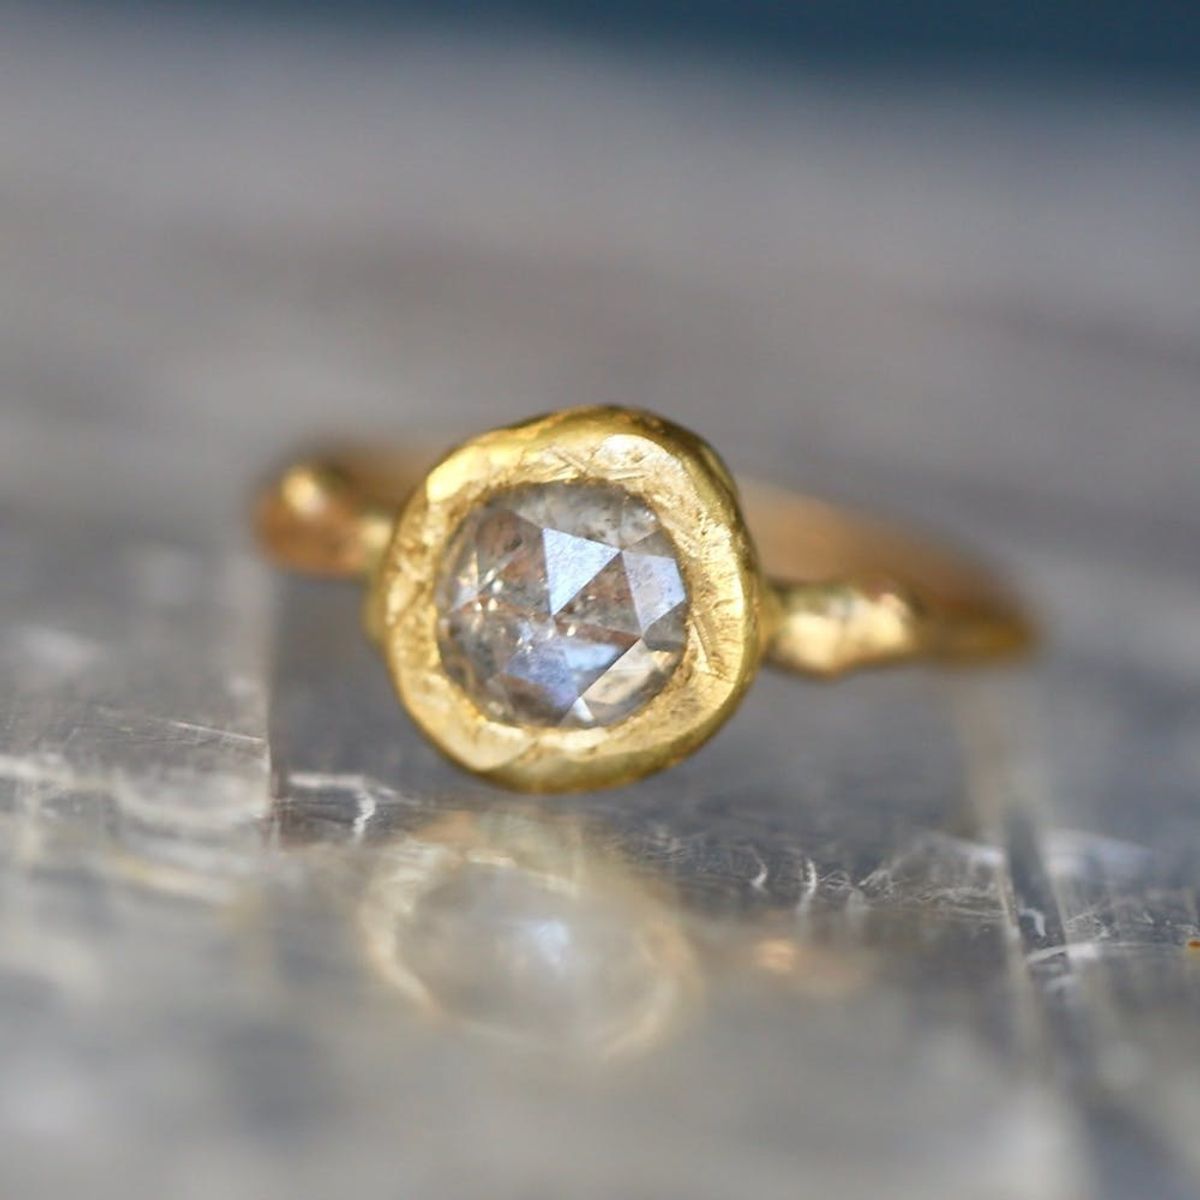 21 Non-Traditional Engagement Rings for the Unconventional Bride